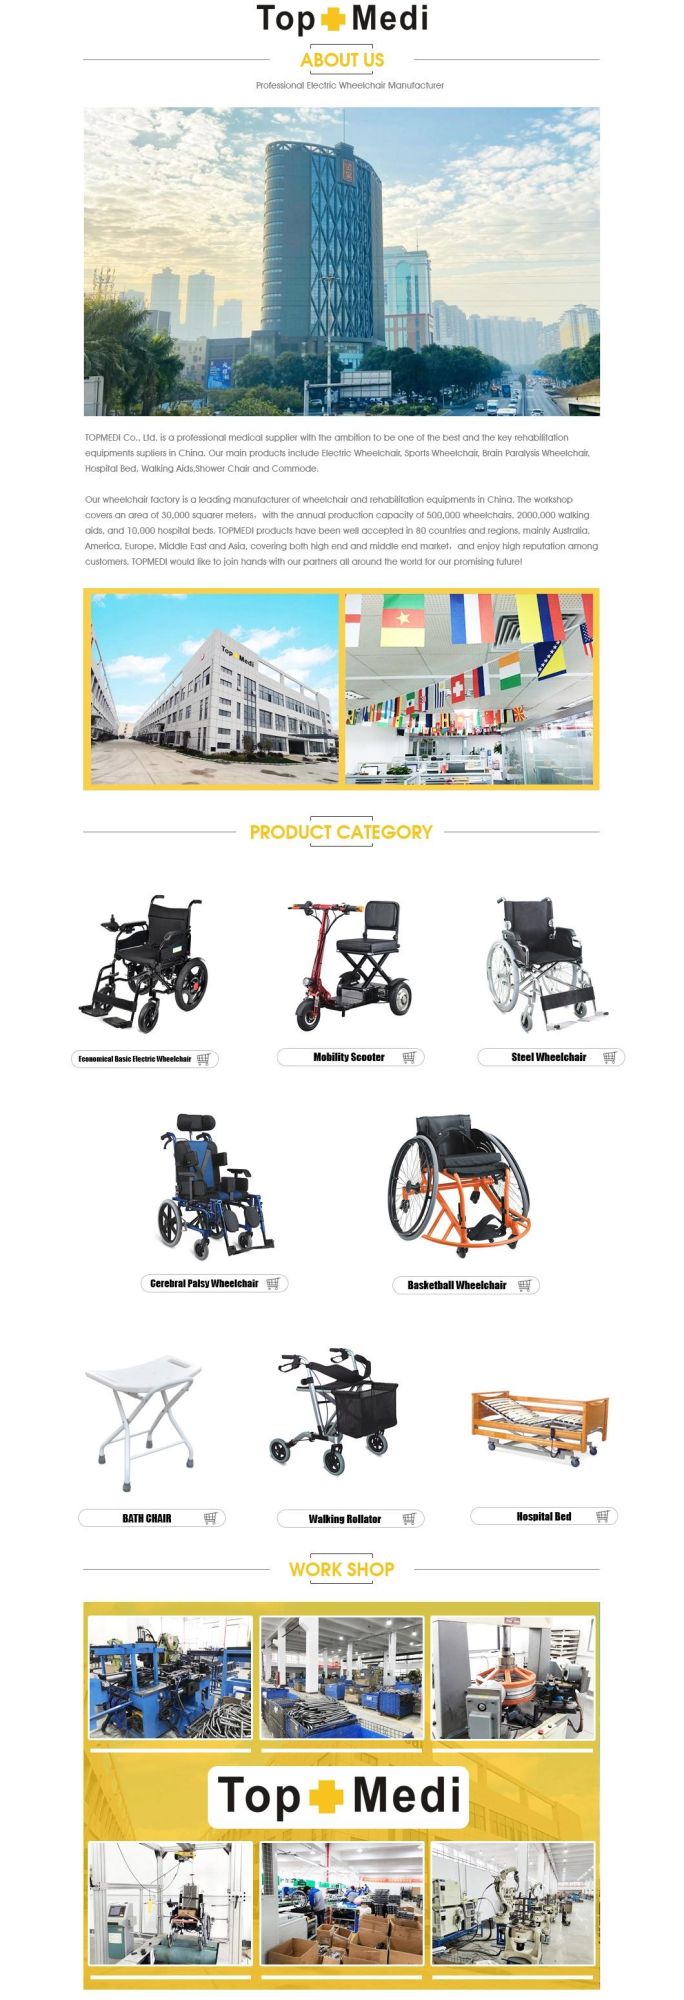 High End Cheap Price Aluminum Active Wheelchair with Anti Tippers